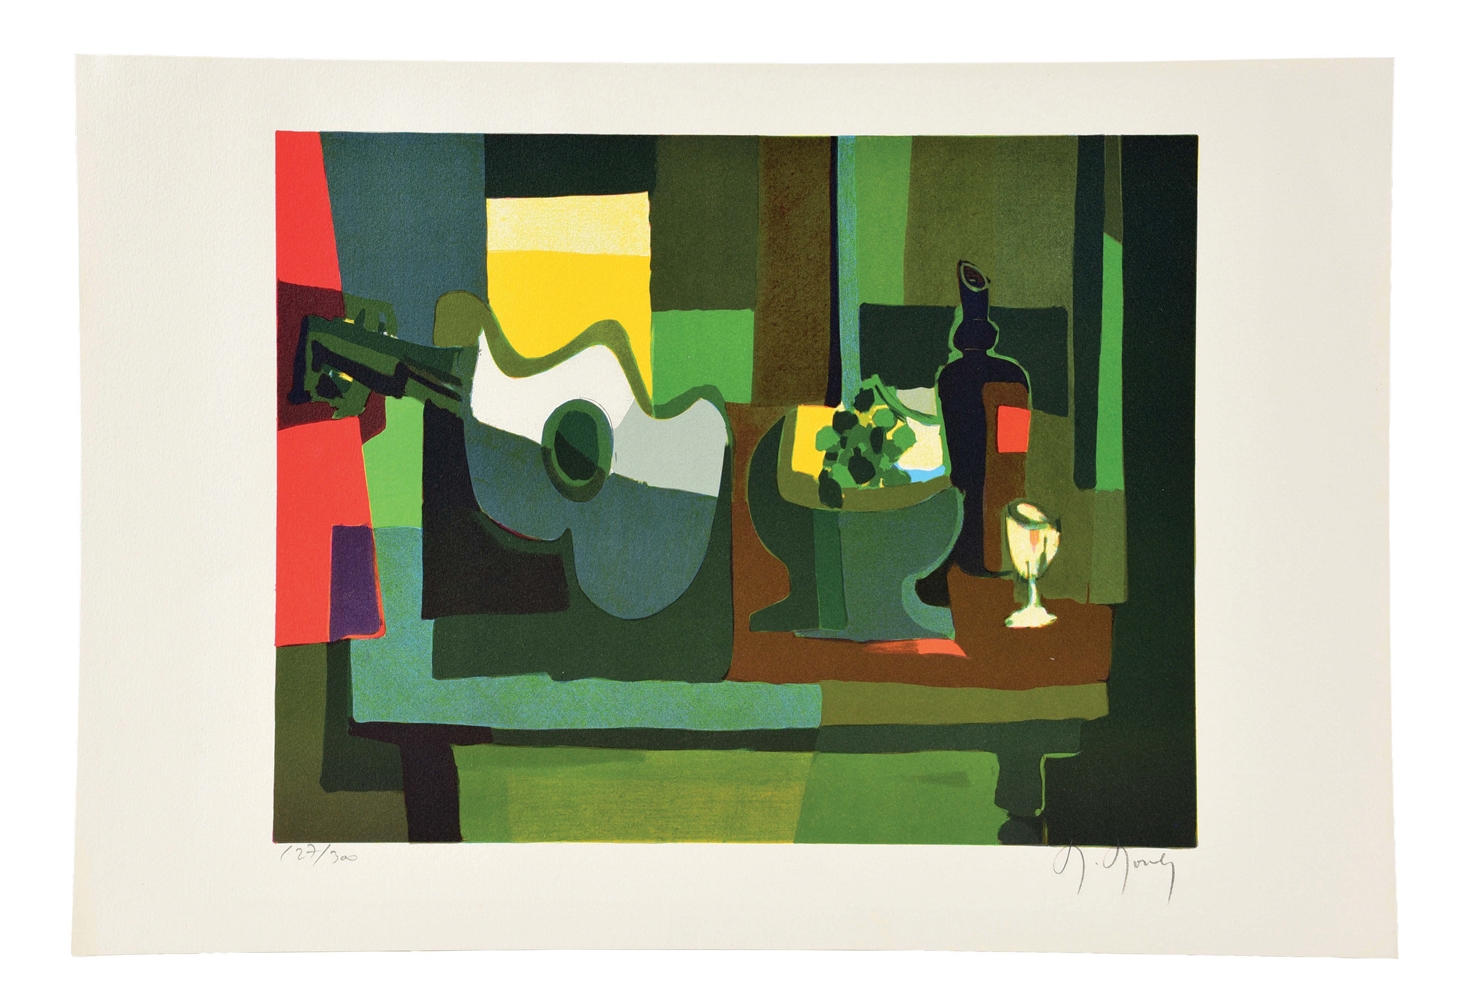 MARCEL MOULY (FRENCH, 1918 - 2008) "GUITARE ET COMPOTIER".